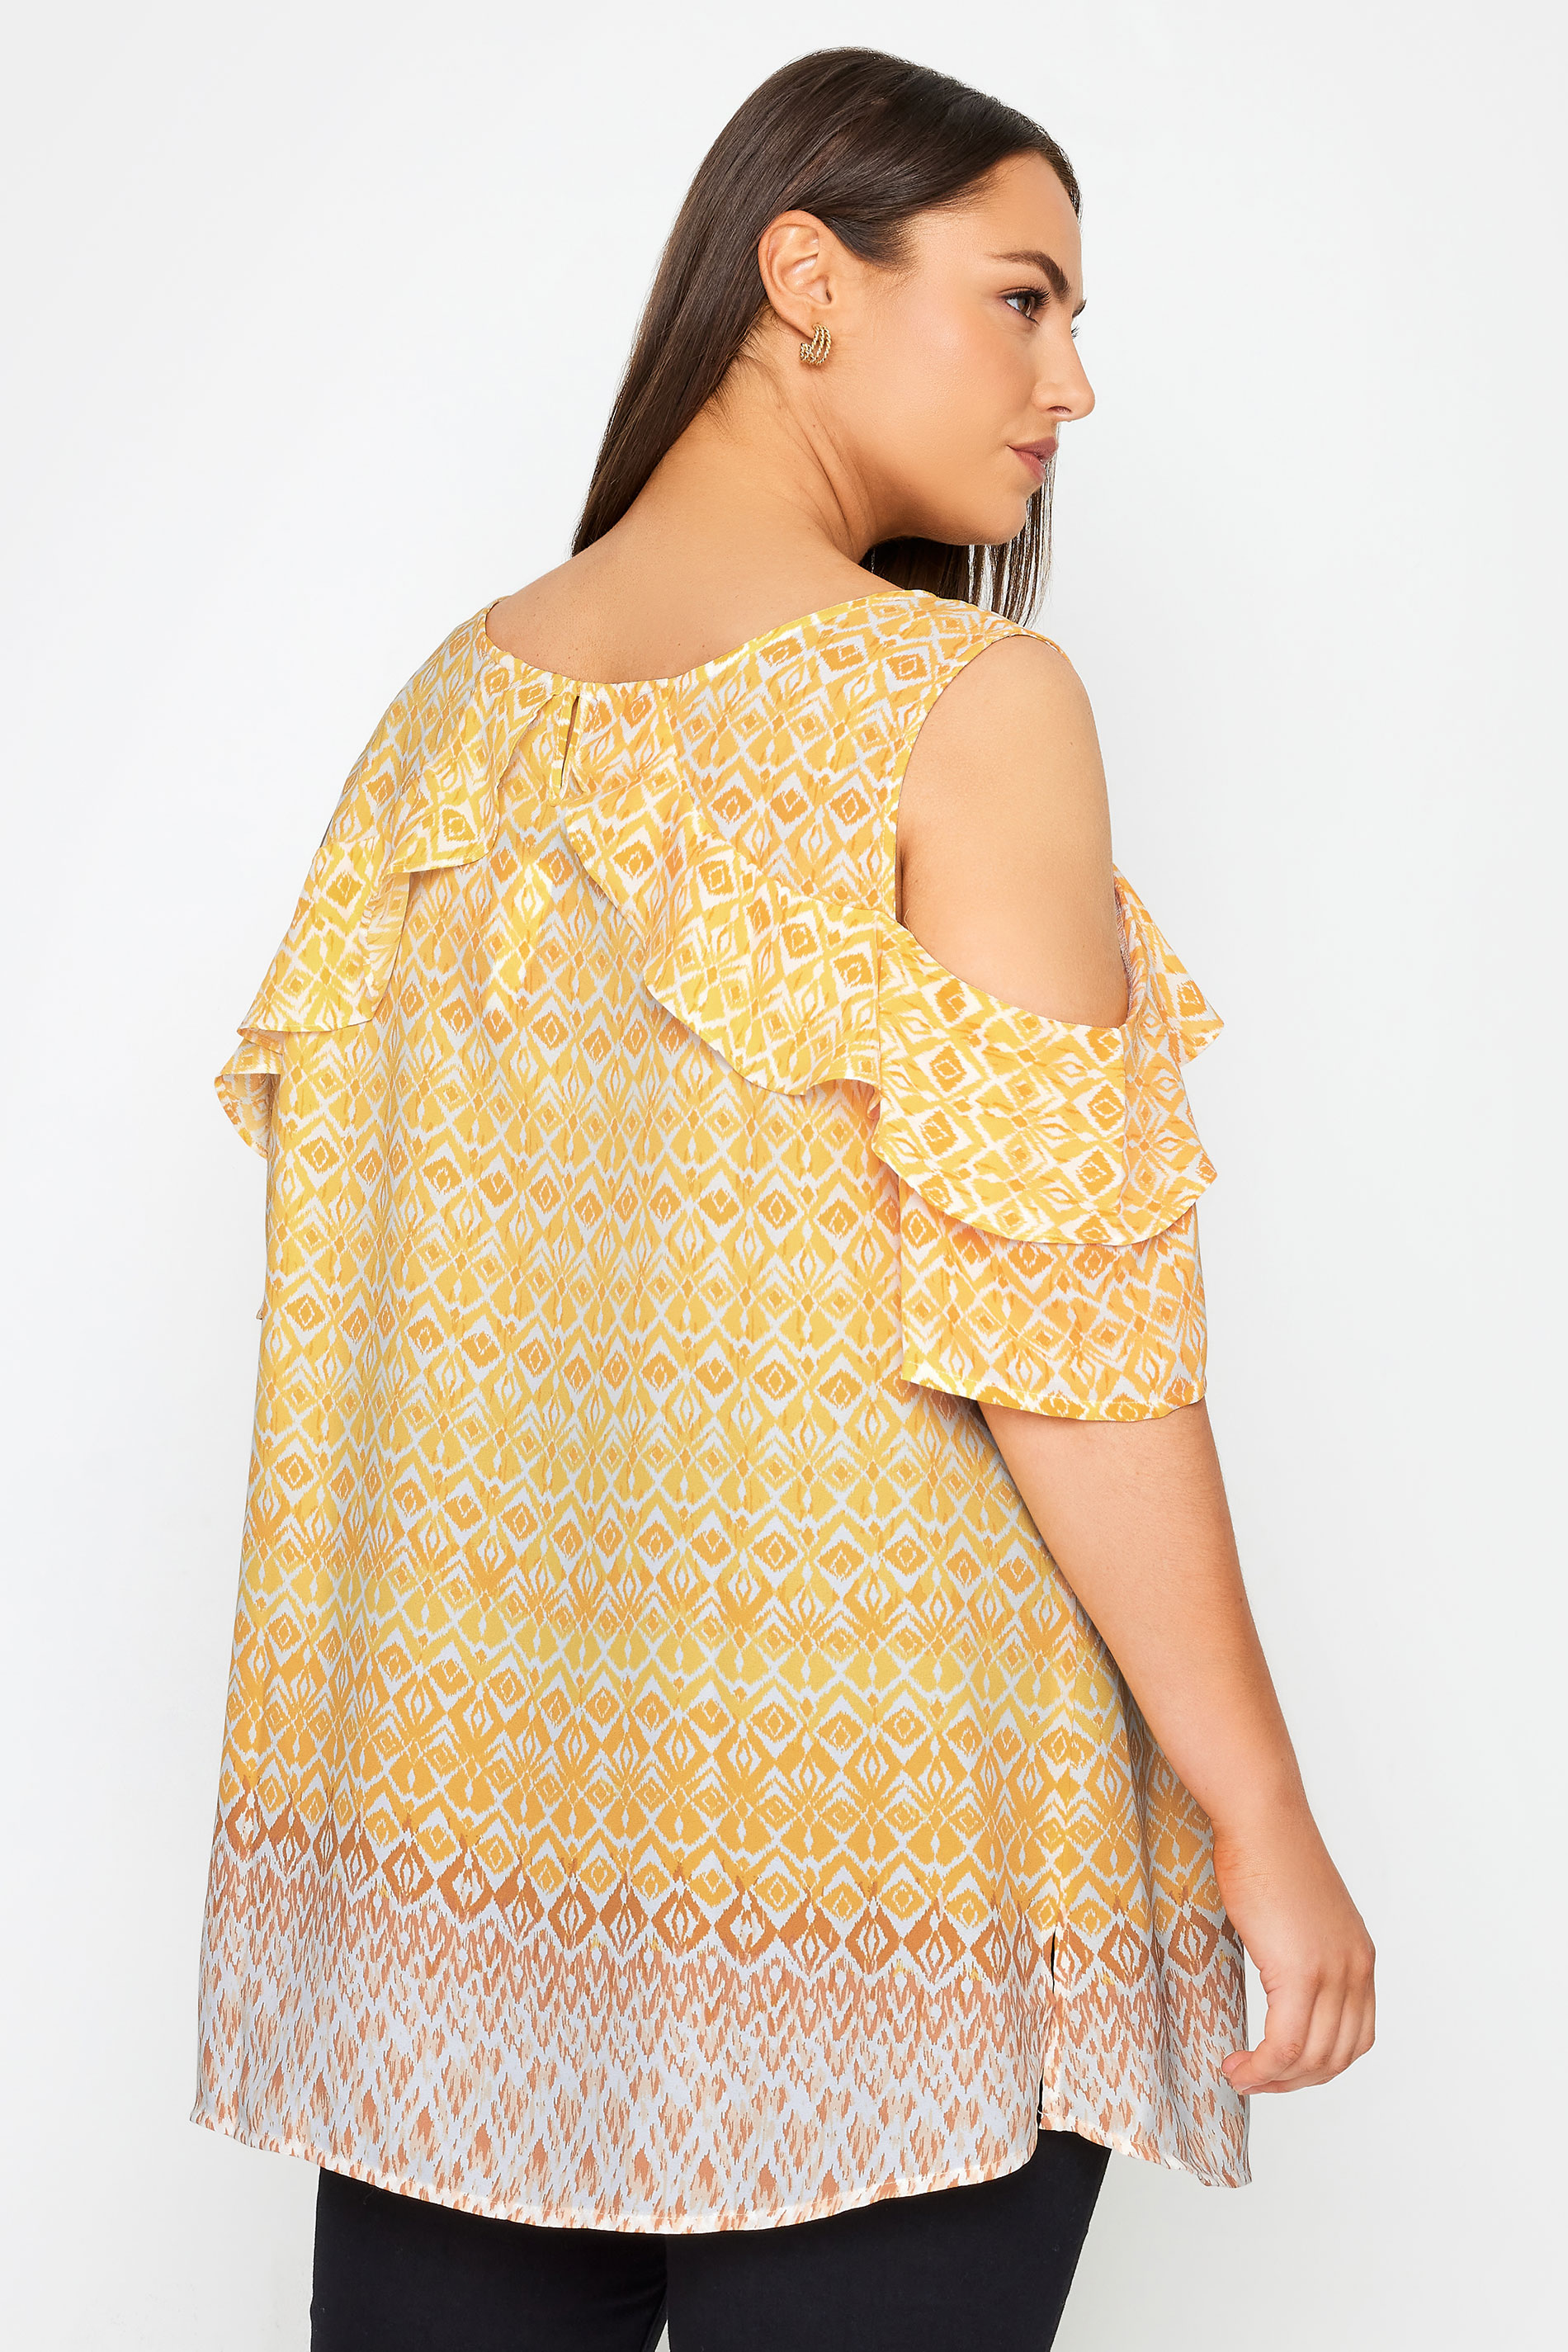 City Chic Yellow Aztec Print Frill Cold Shoulder Top 3